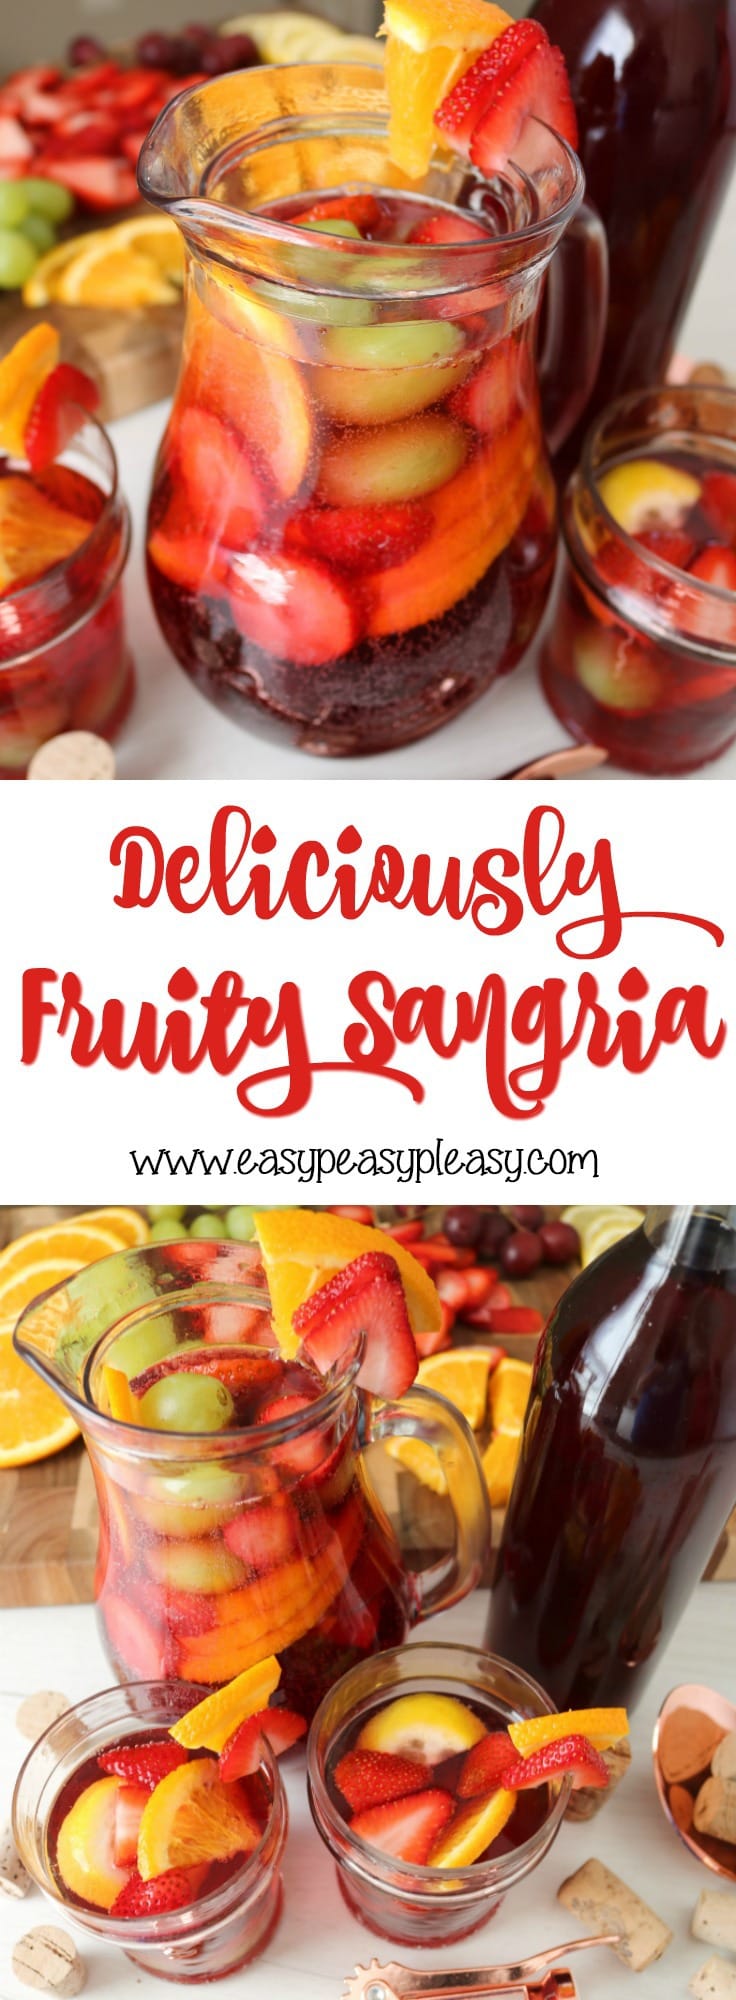 Get your party started right with this easy and Deliciously Fruity Sangria Recipe.